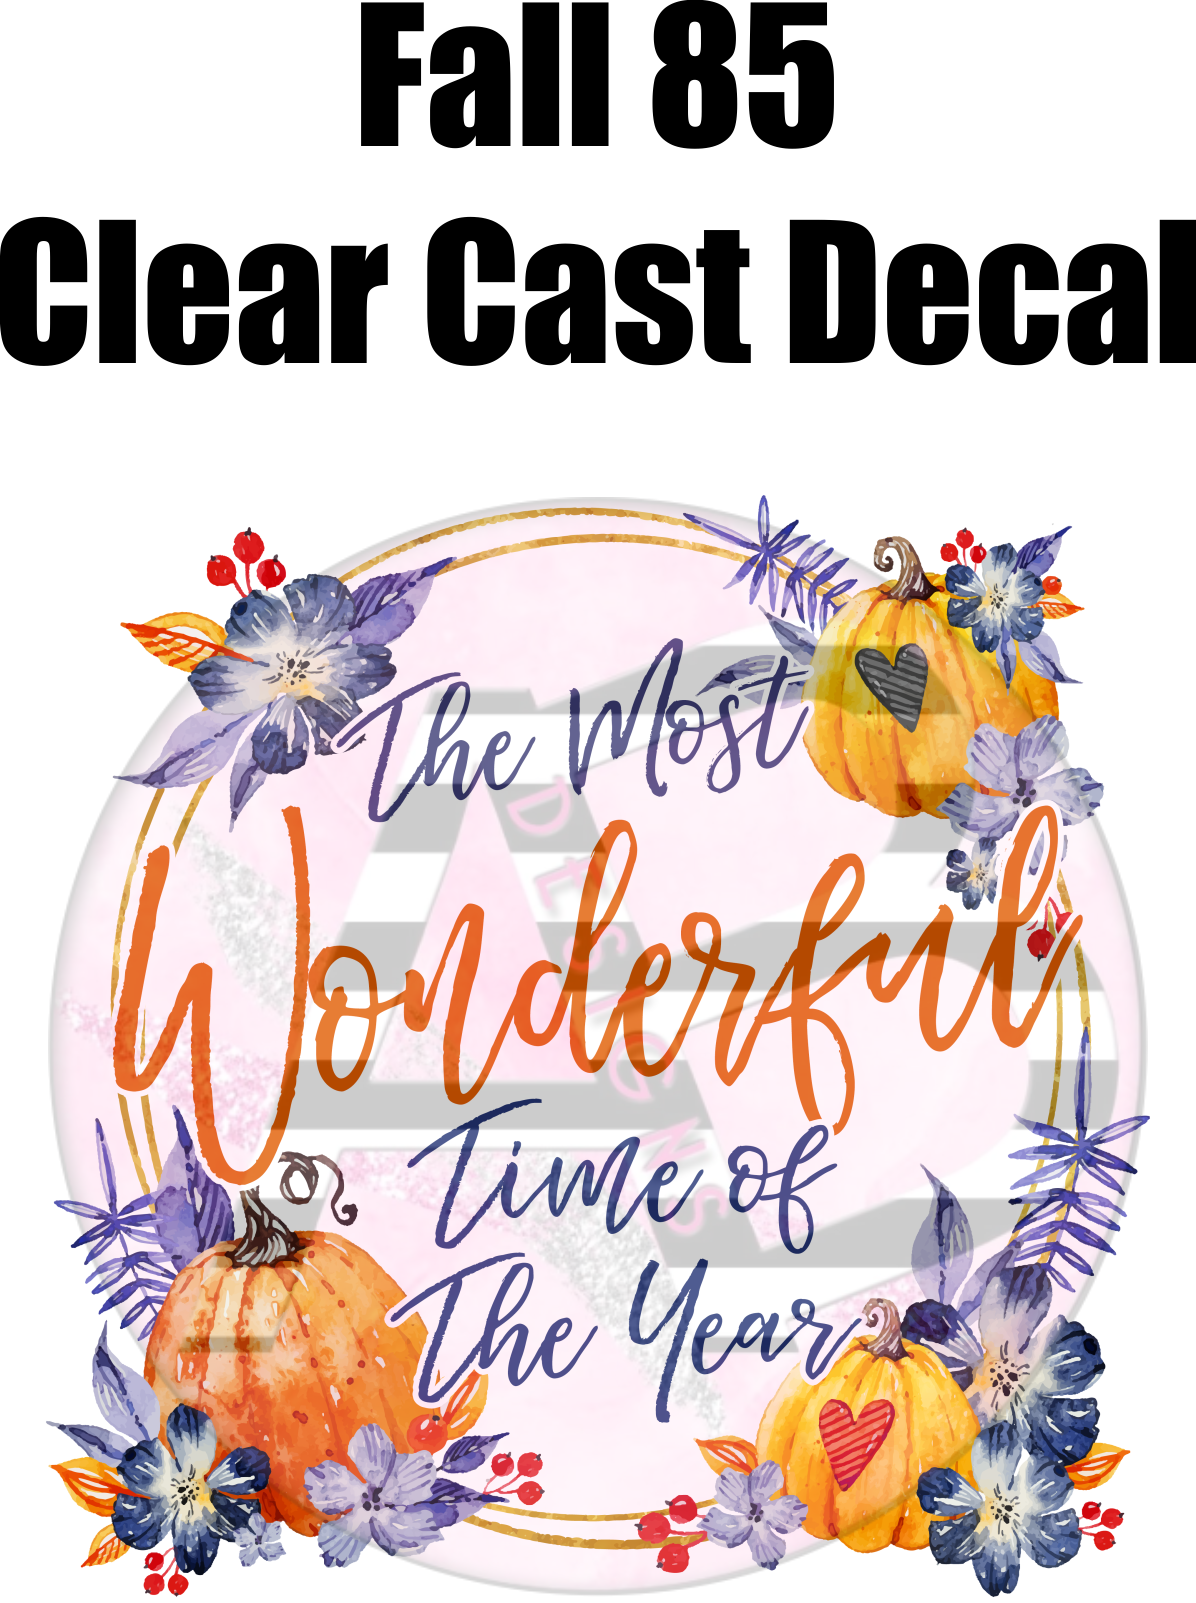 Fall 85 - Clear Cast Decal